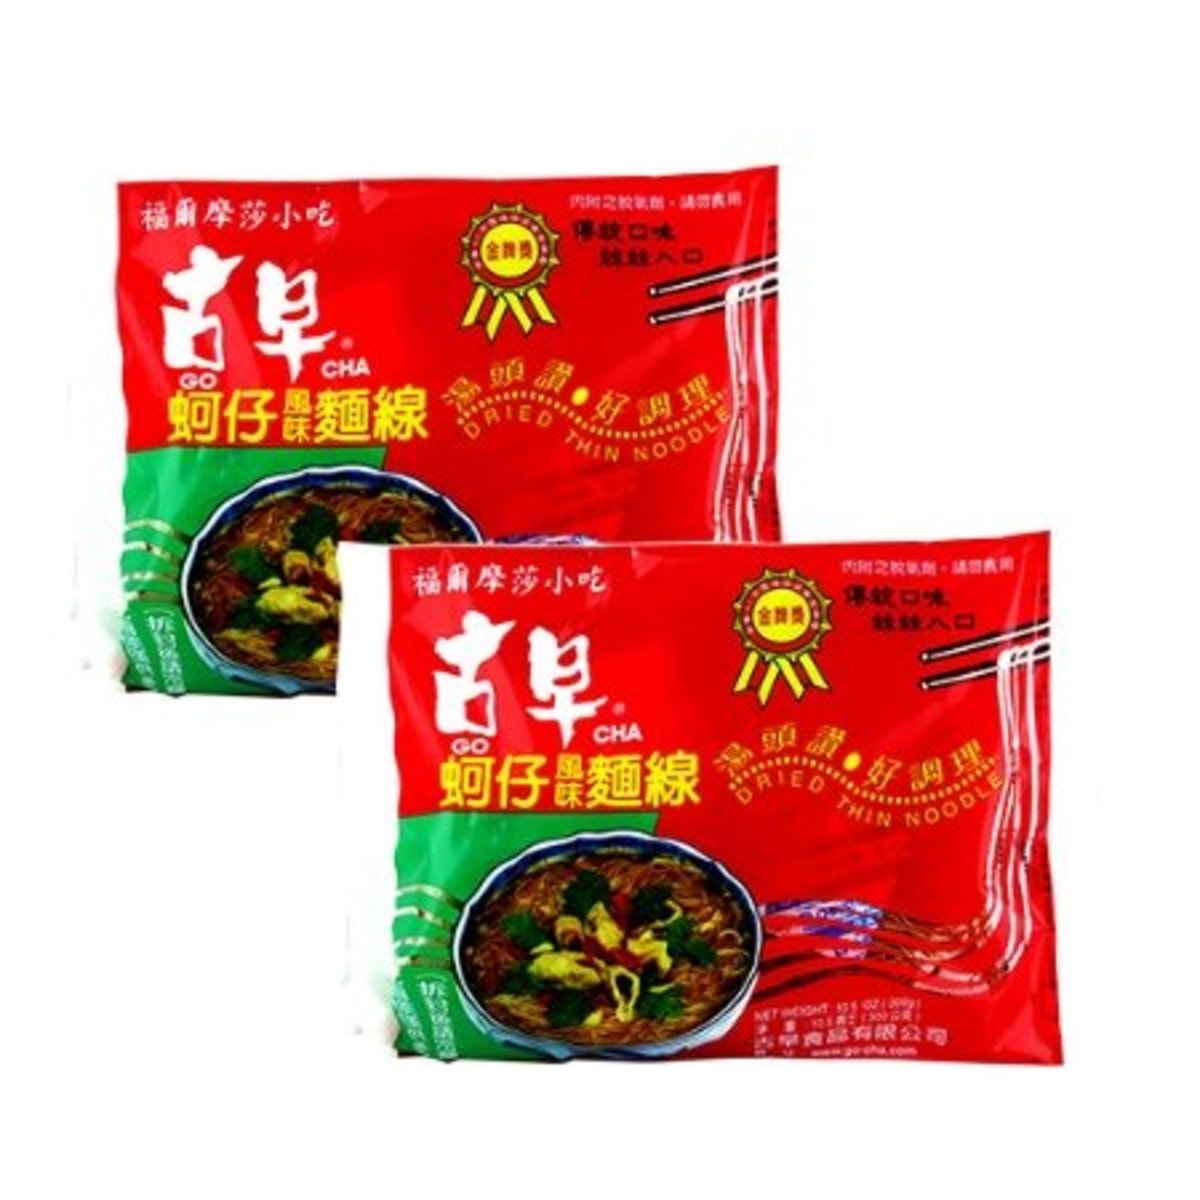 Go Cha Dried Thin Noodle 300g X 2 Packs Rebate Promotion 65 Set 